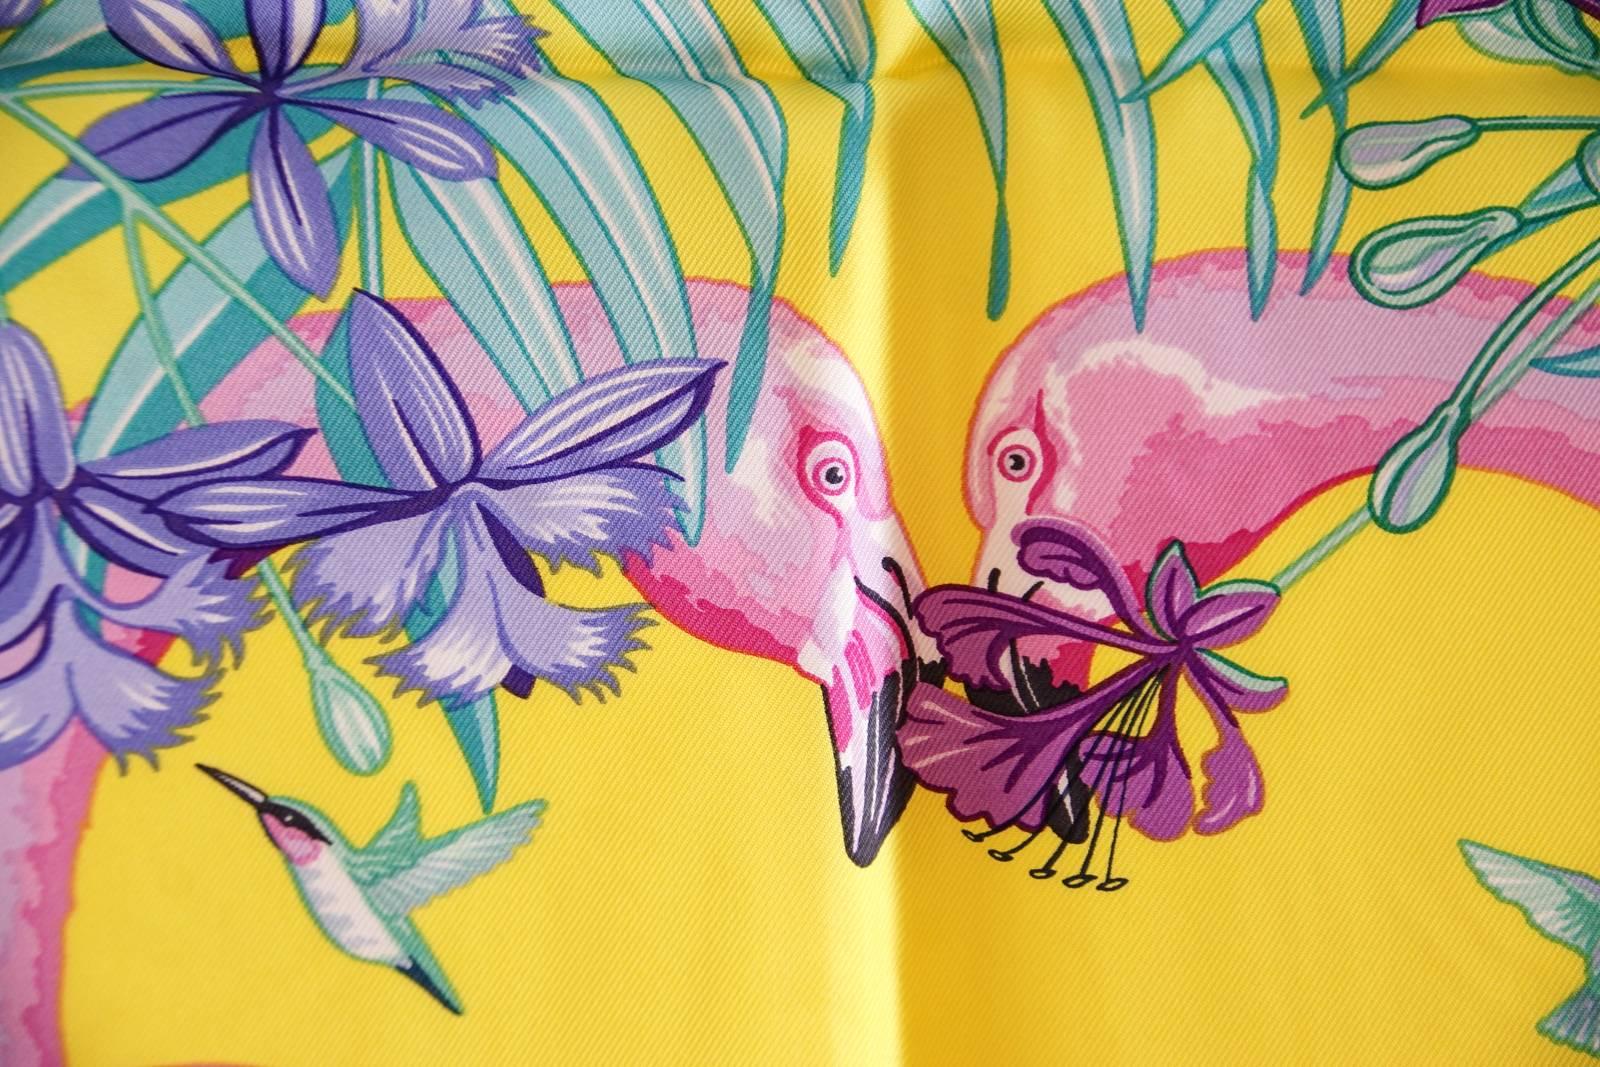 Guaranteed authentic limited edition Hermes Flamingo Party silk scarf created for the opening of the Miami Hermes store. 
Exotic lush plants and flowers with Flamingos and hummingbirds.
Rich blues, pinks, purples and yellow.
HERMES - MIAMI printed